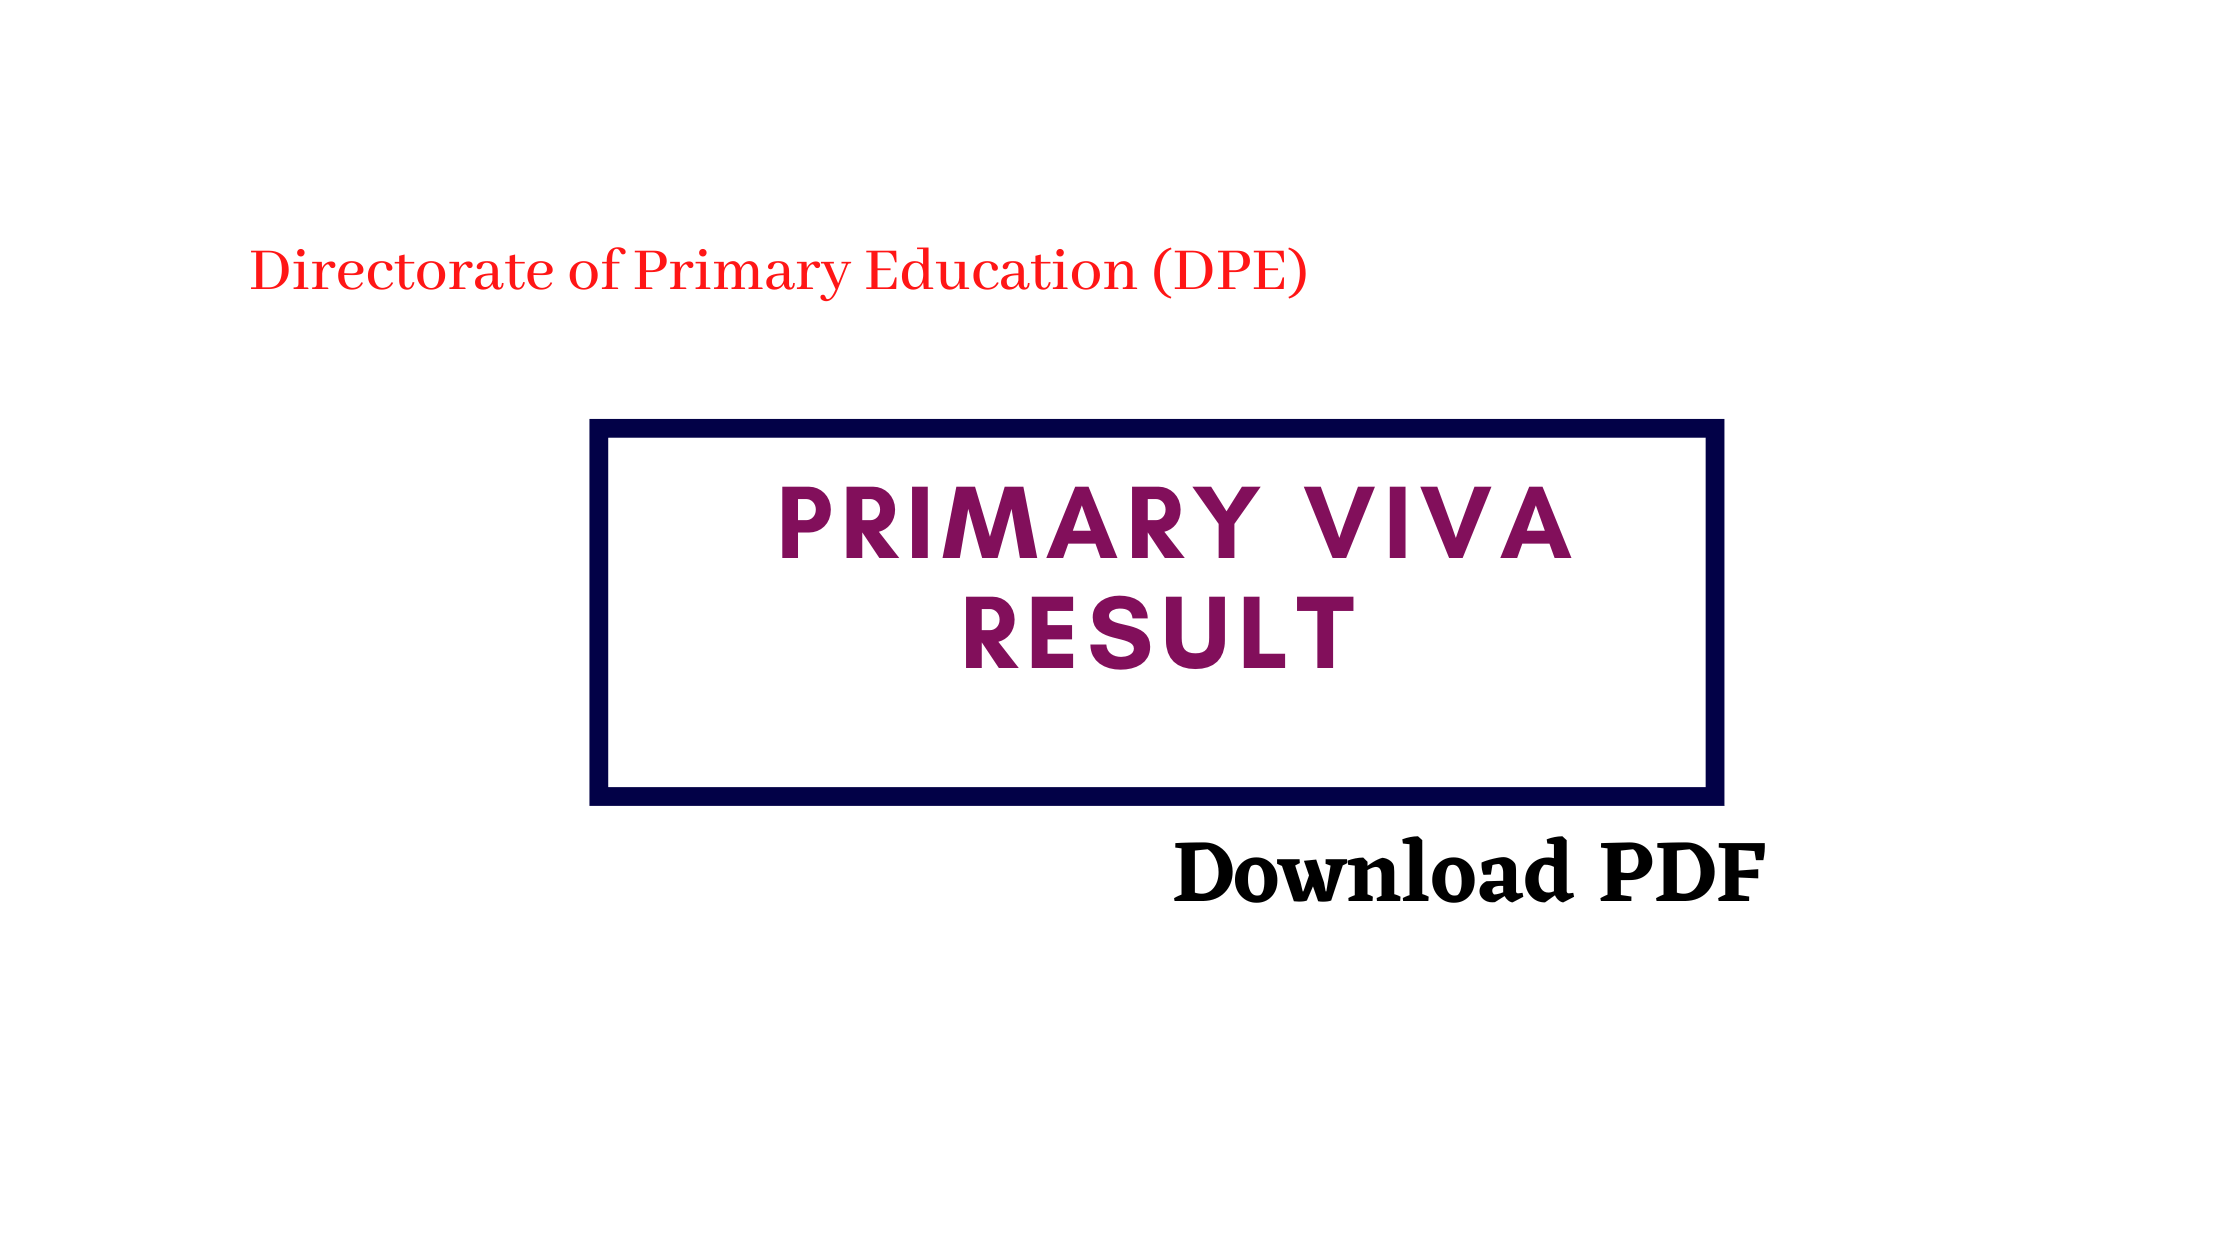 Primary result 2022